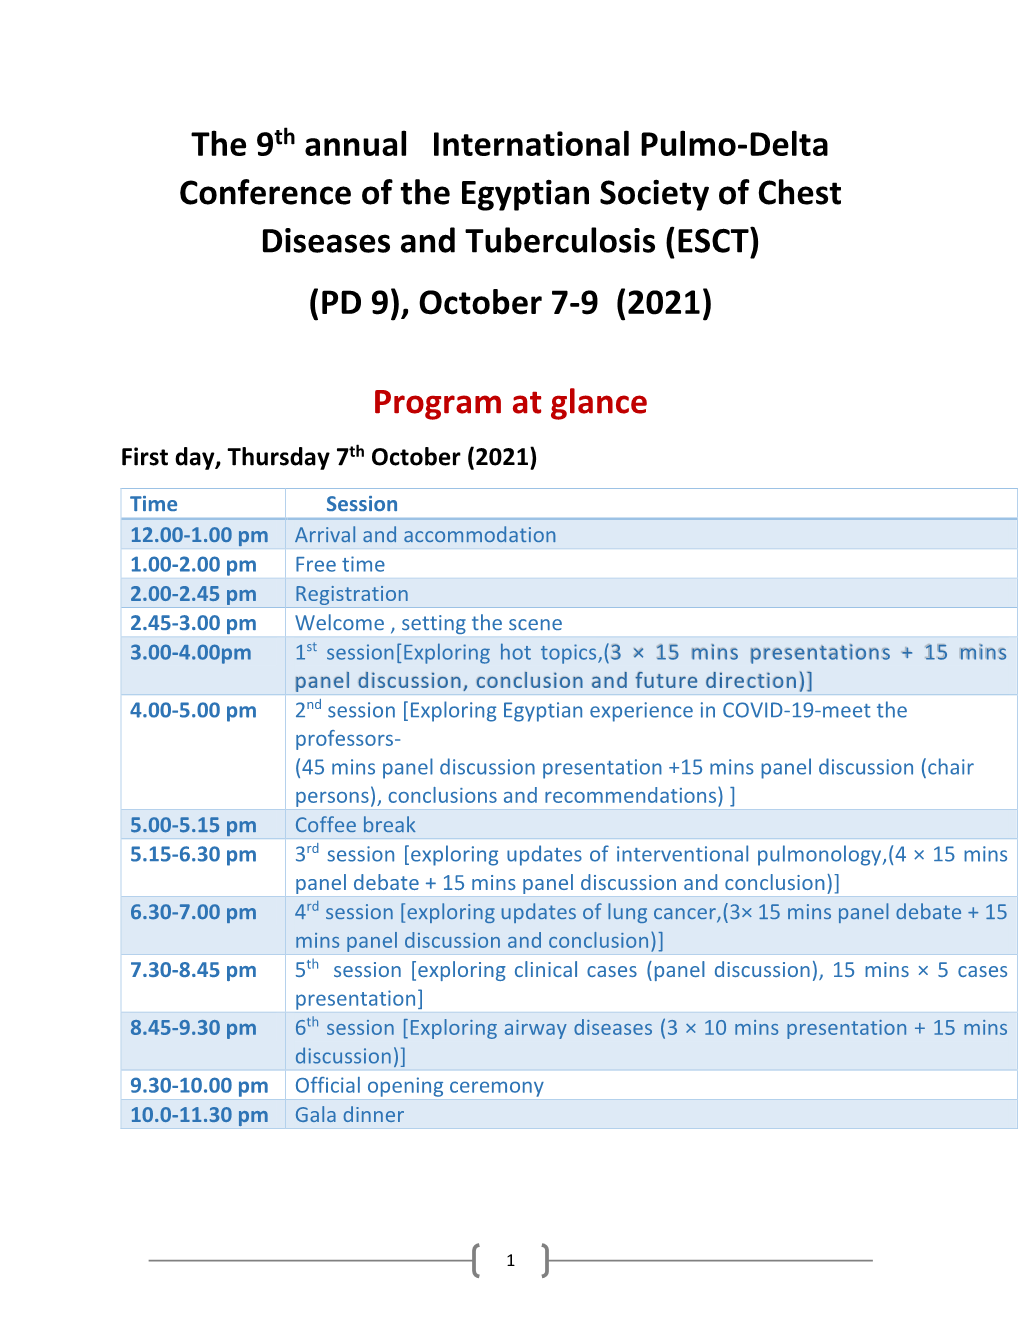 The 9Th Annual International Pulmo-Delta Conference of the Egyptian Society of Chest Diseases and Tuberculosis (ESCT) (PD 9), October 7-9 (2021)